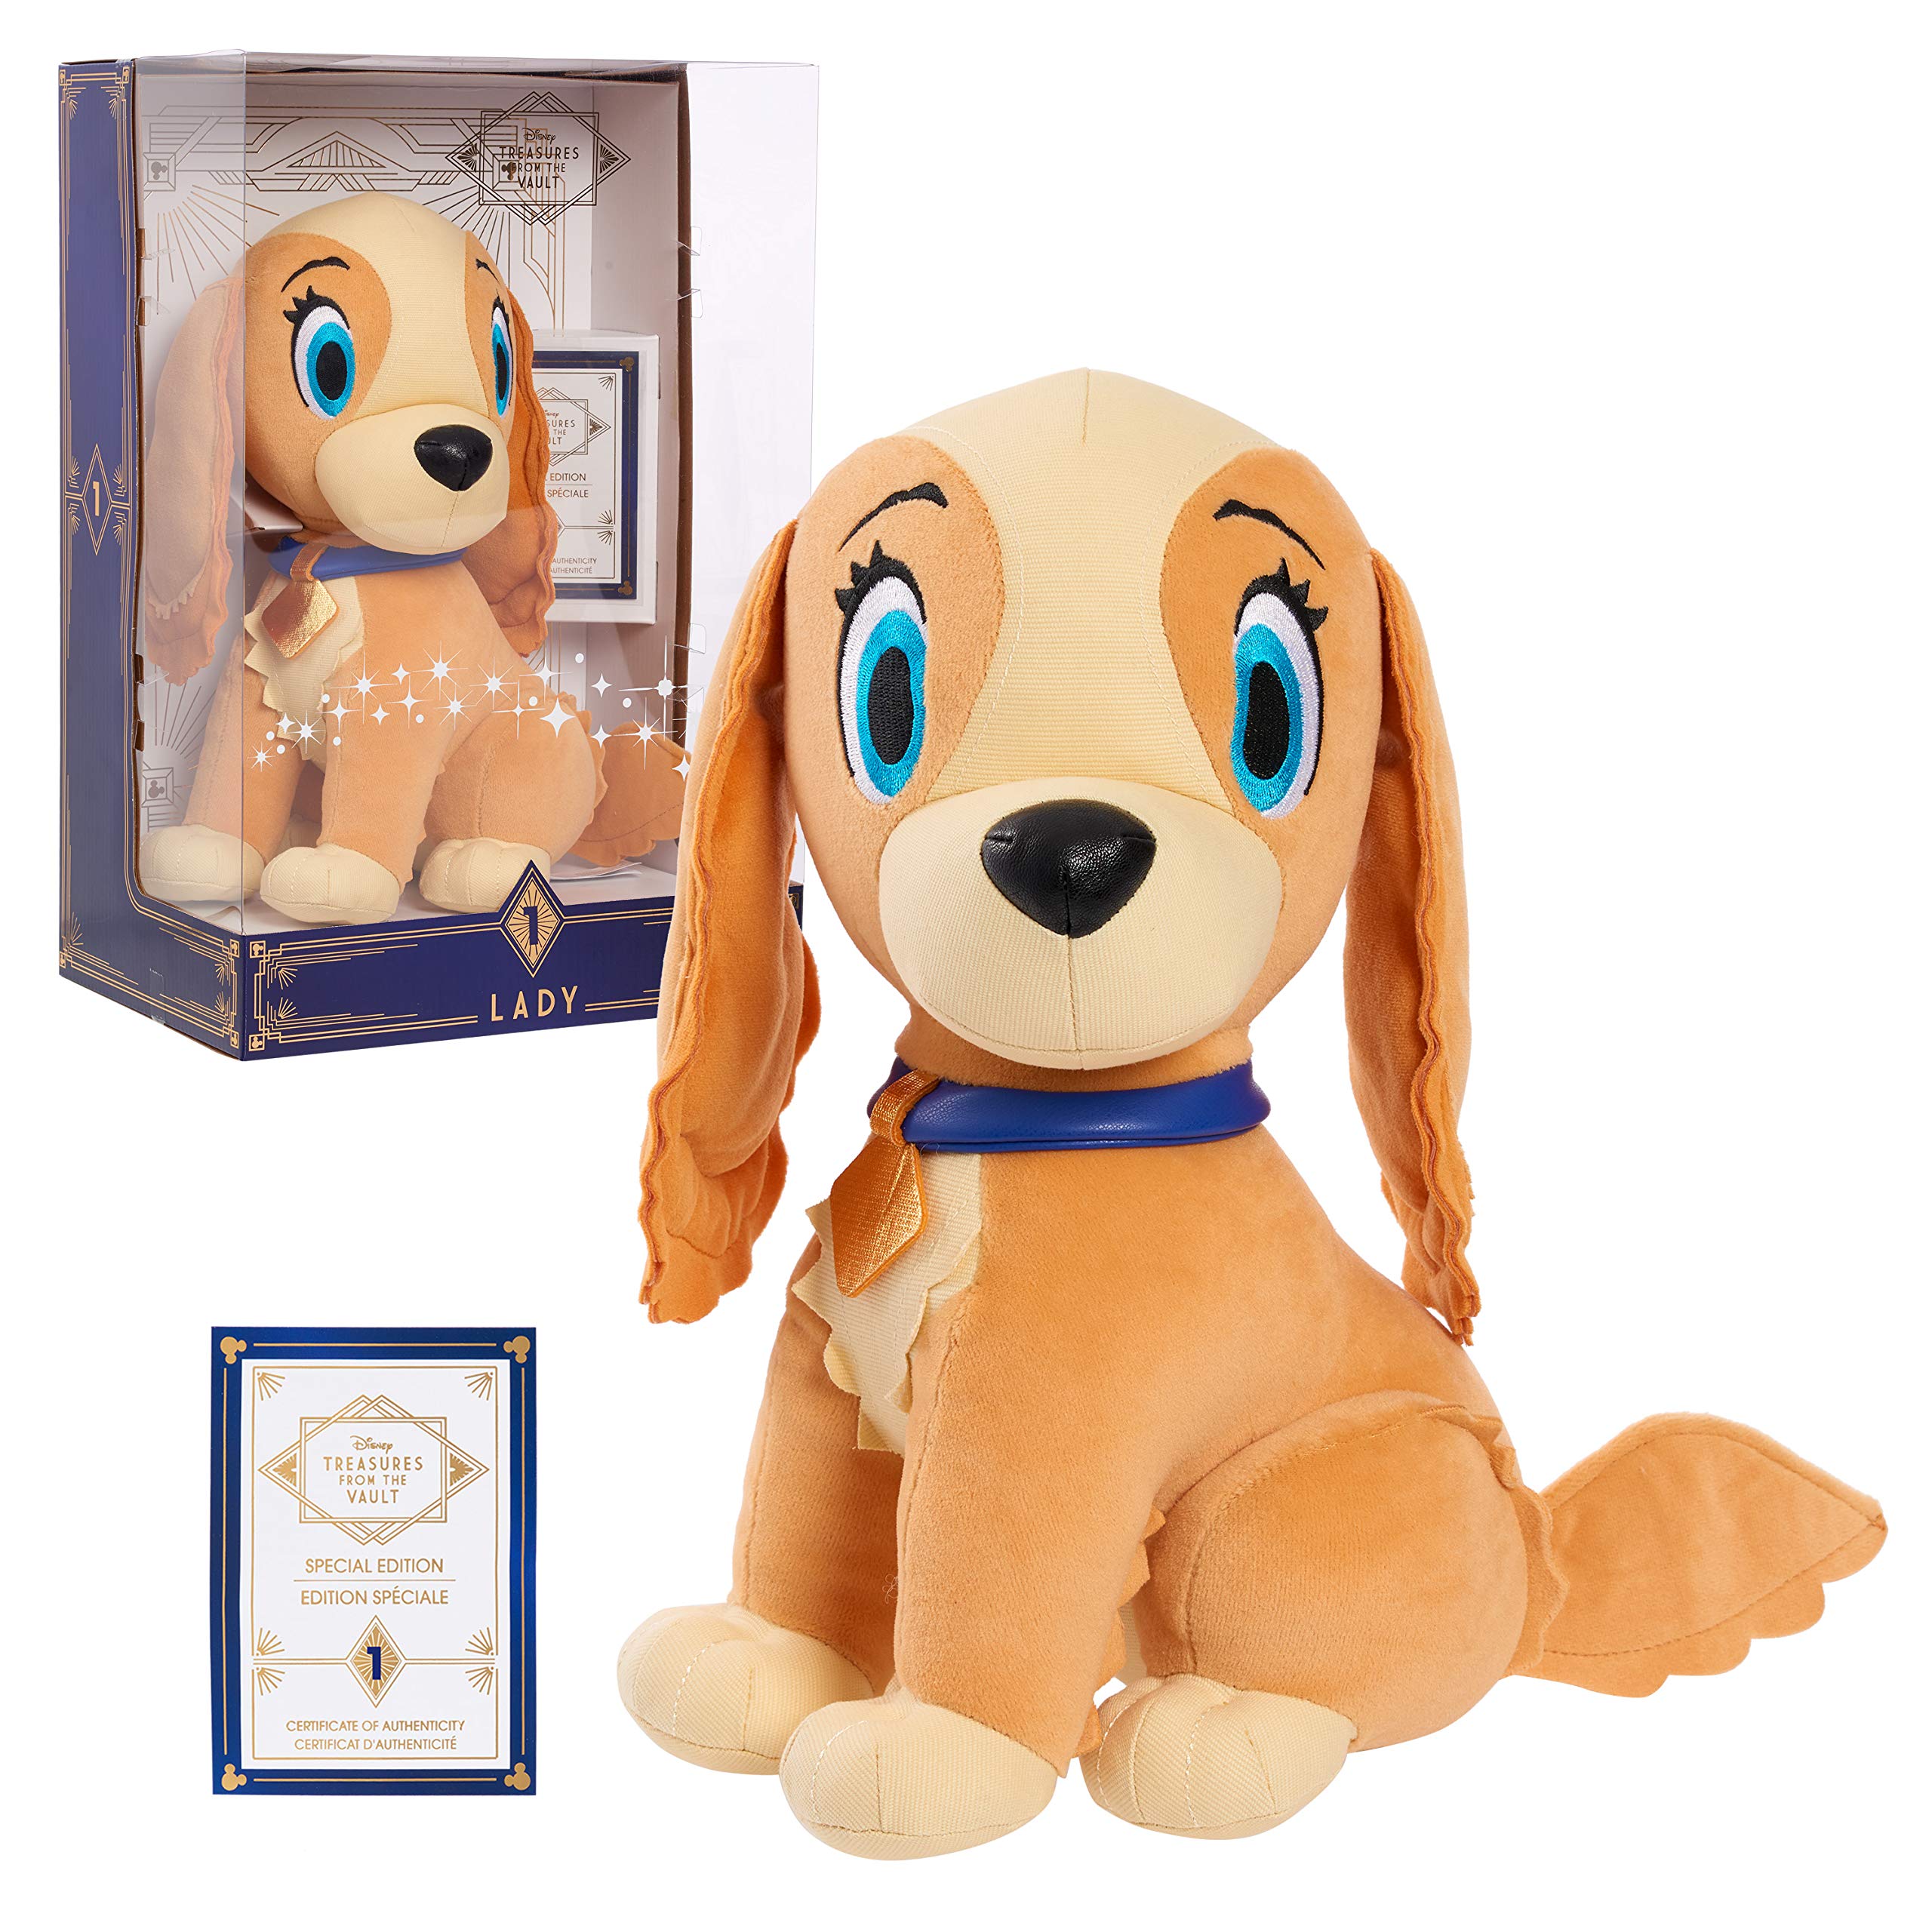 Disney Treasures From the Vault, Limited Edition Lady Plush, Amazon Exclusive, 3+ years